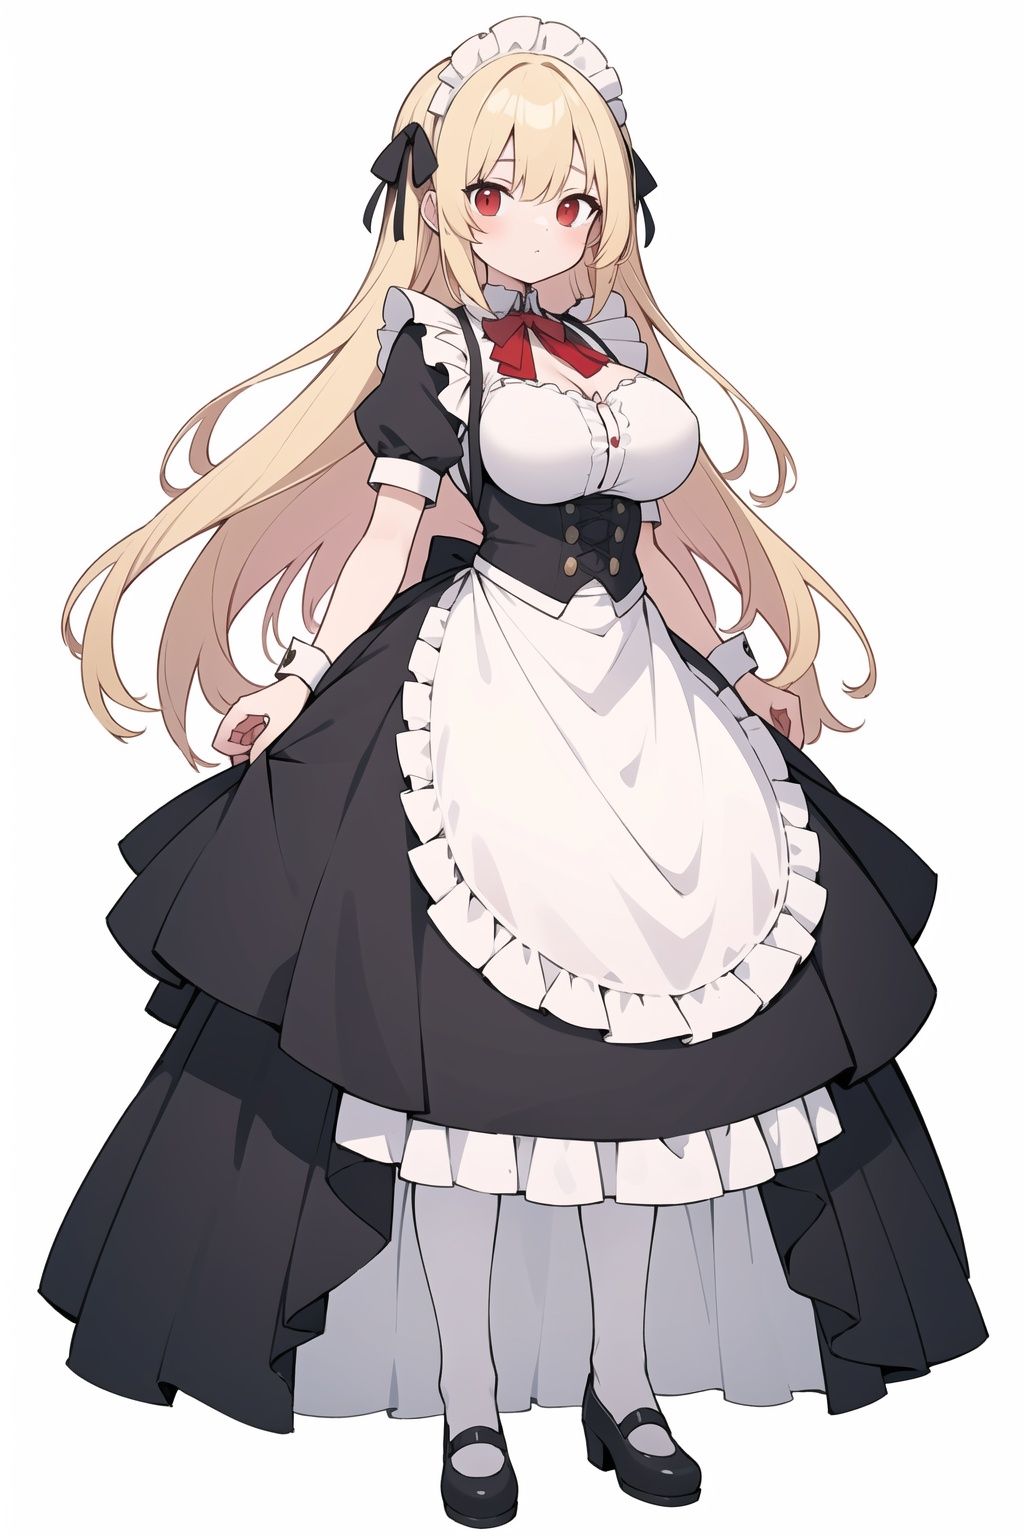  scales, big breasts, red eyes, expressionless, blonde hair, white_background, victorian maid dress